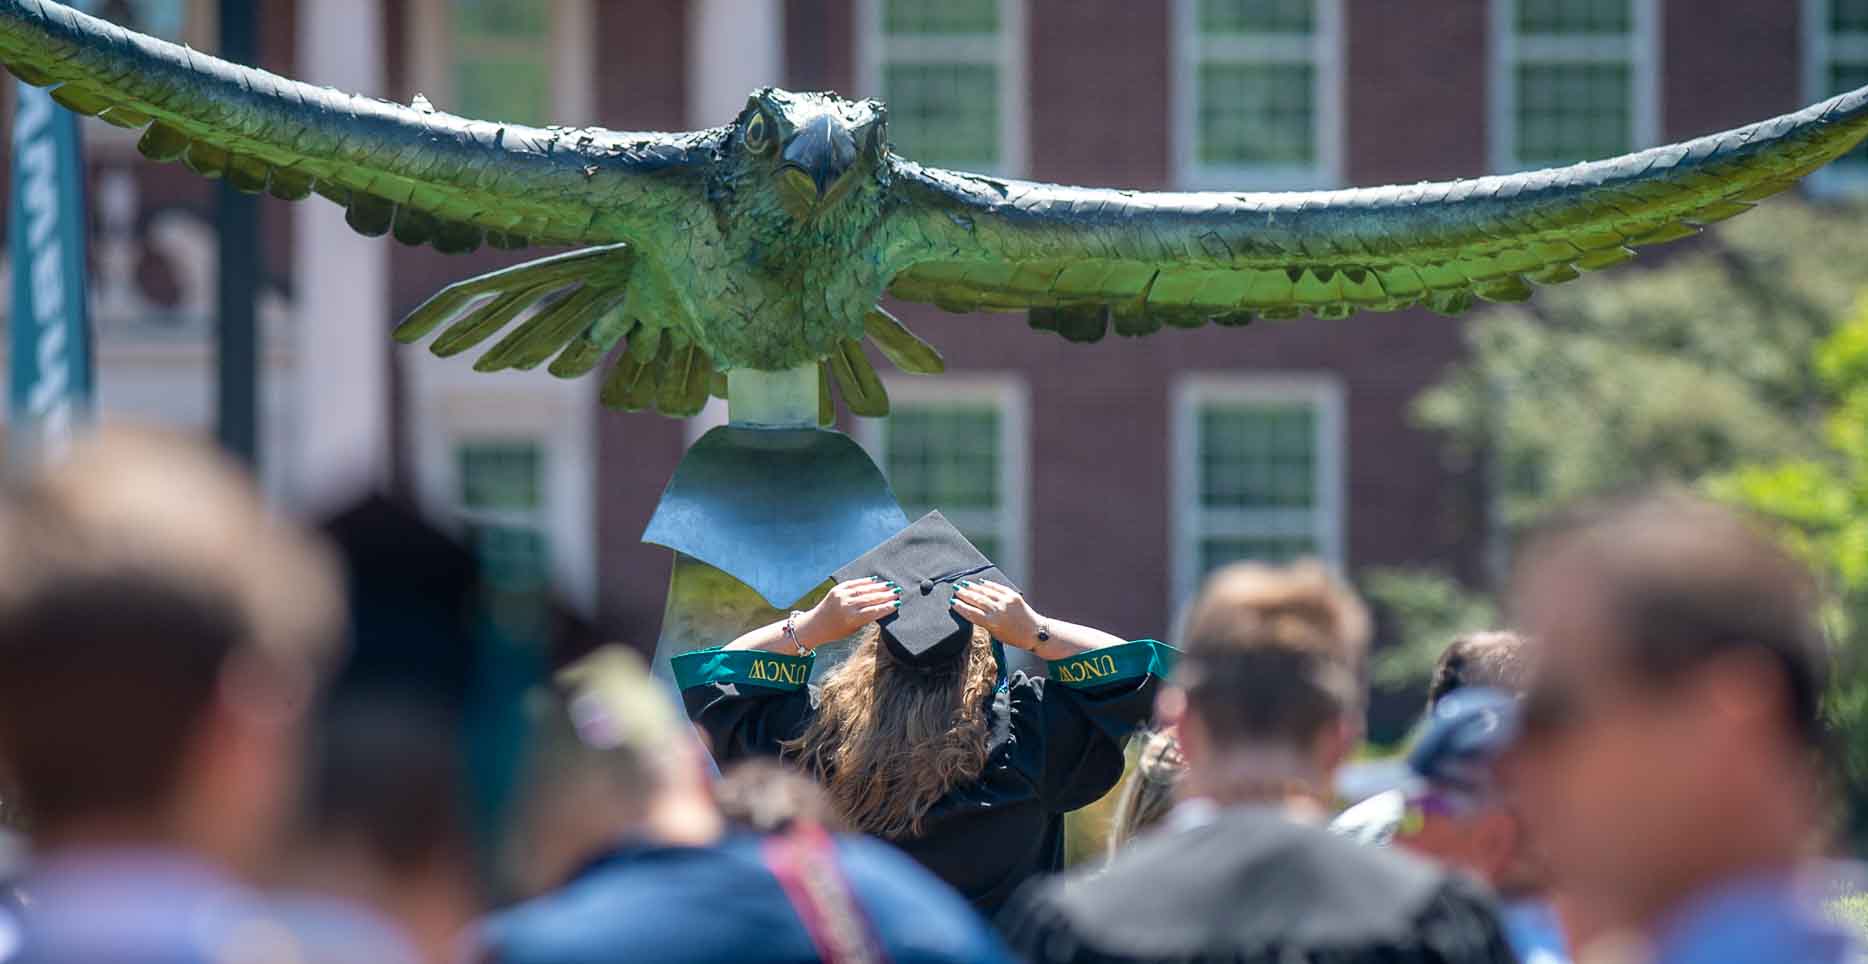 Student holds graduation cap and looks up at UNCW seahawk statue, as crowd from graduation ceremony walks by her.